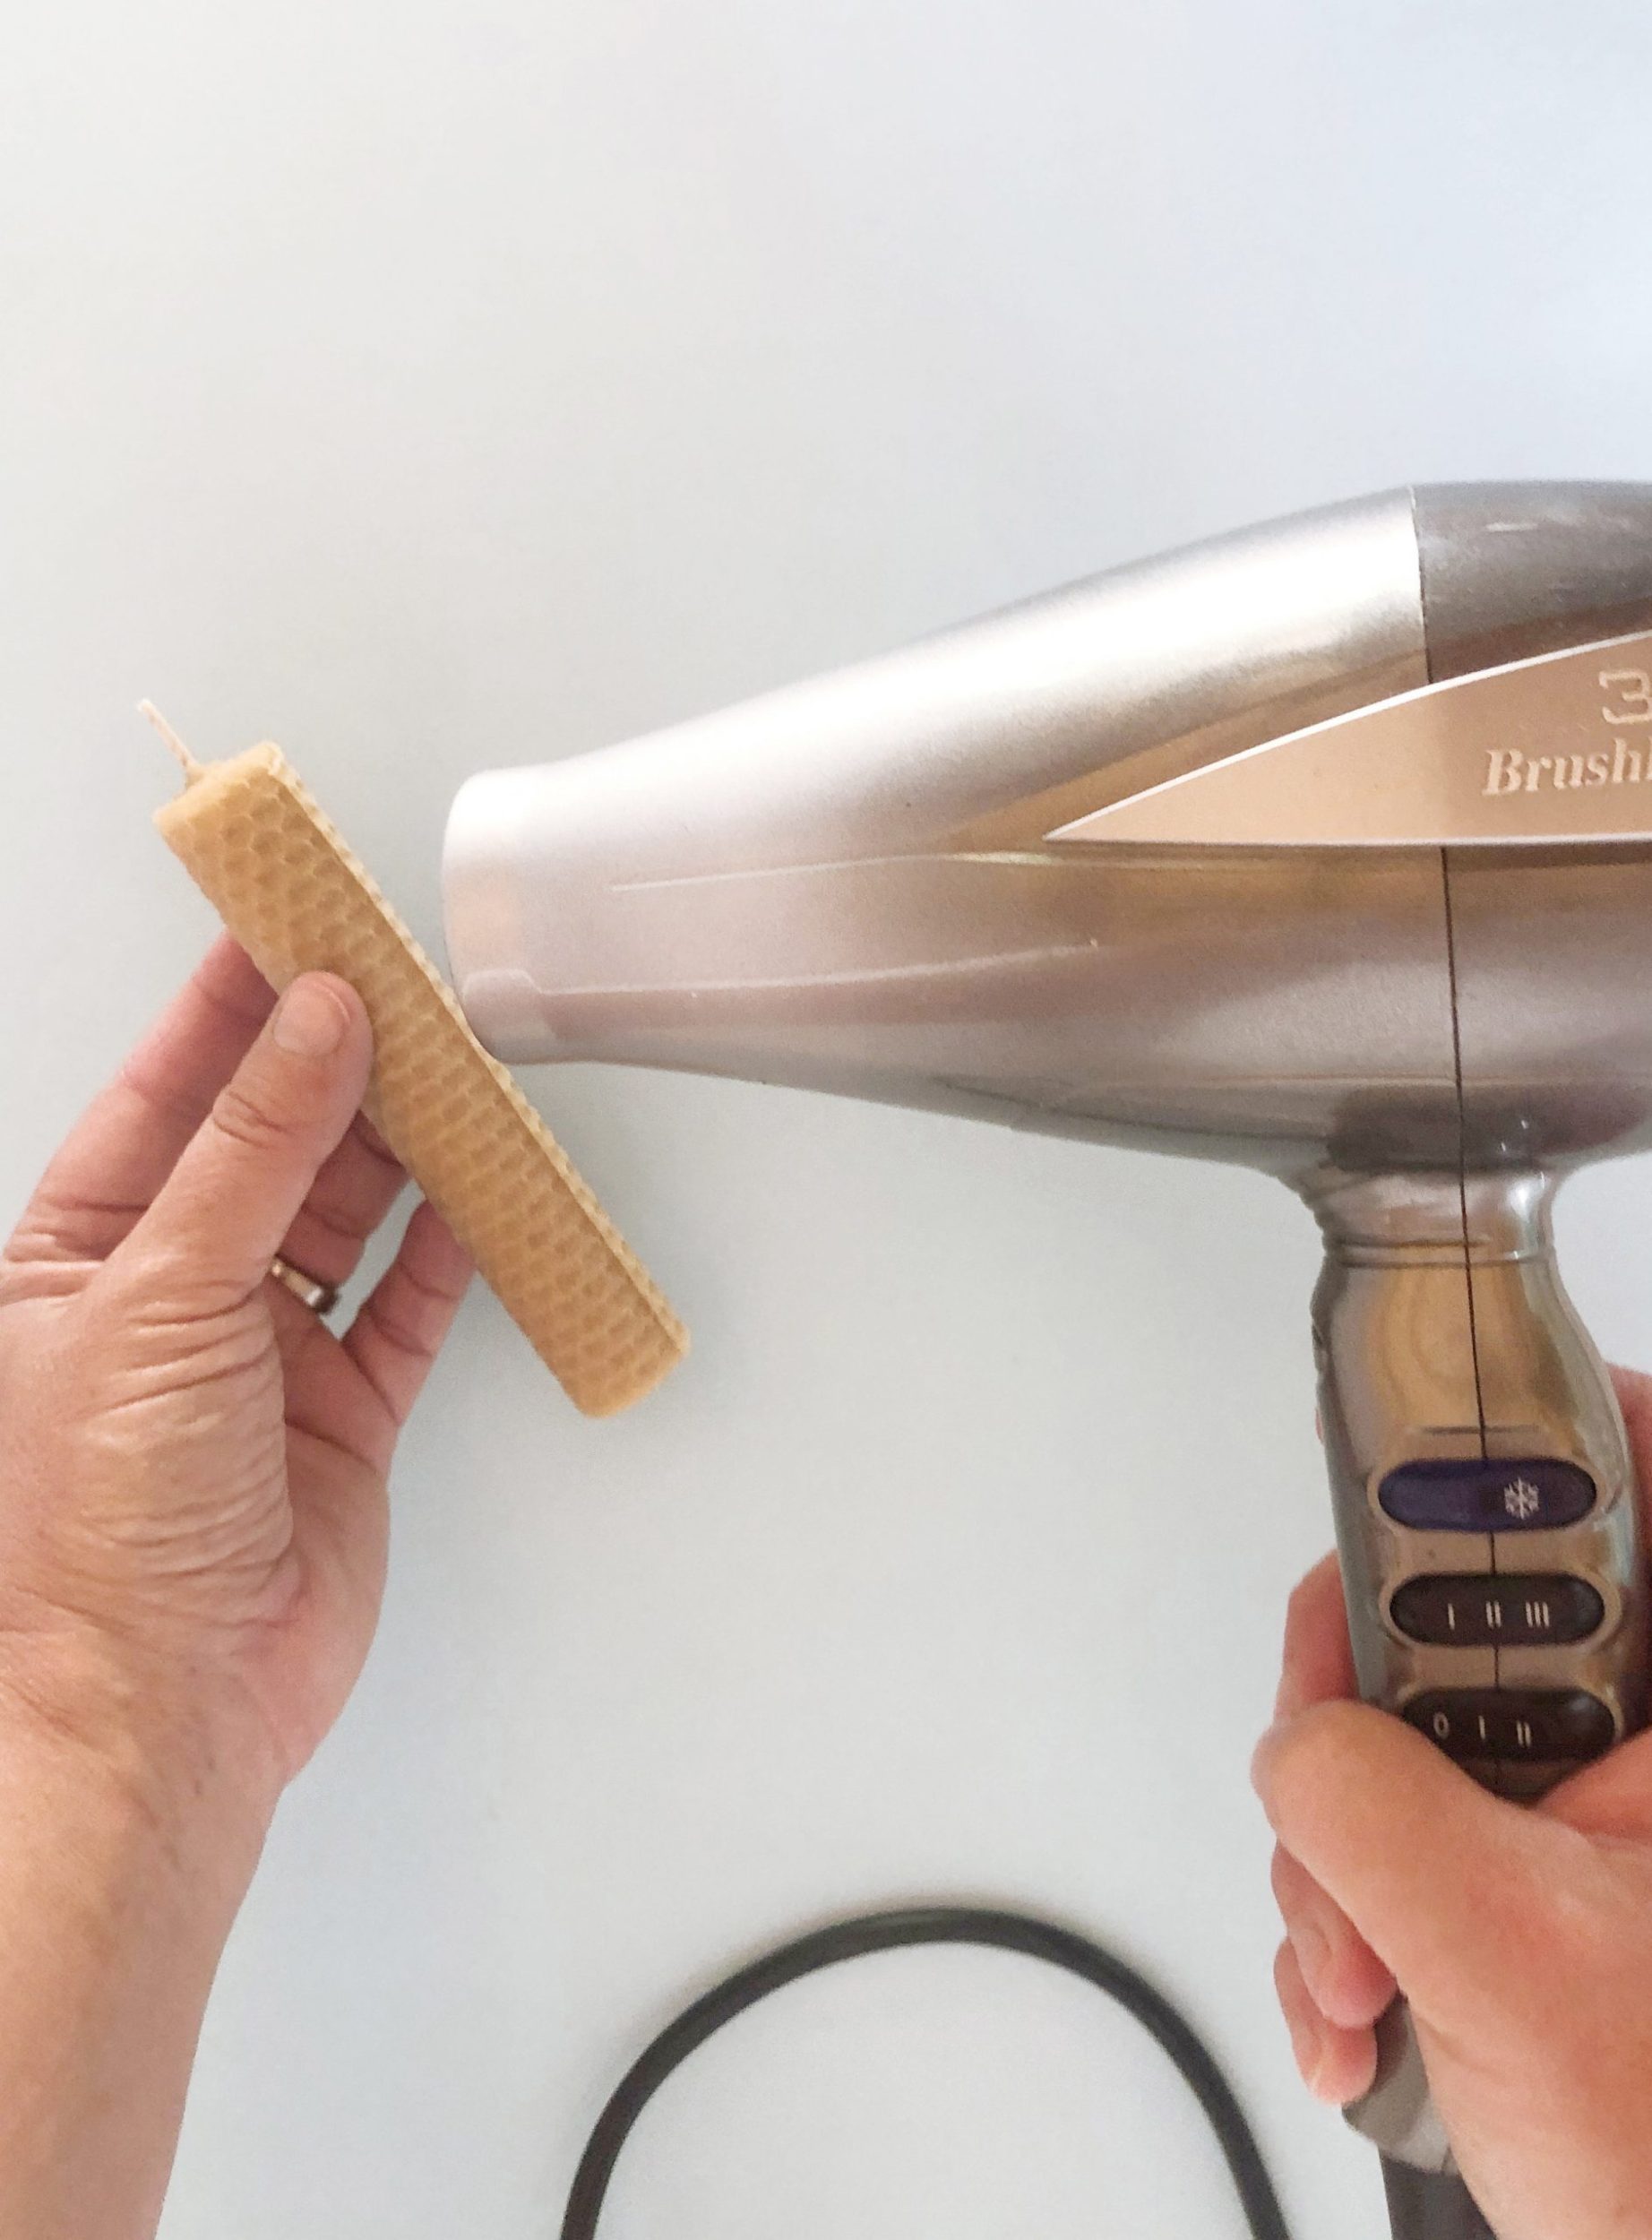 Hairdryer to warming the wax edge of bees wax candle